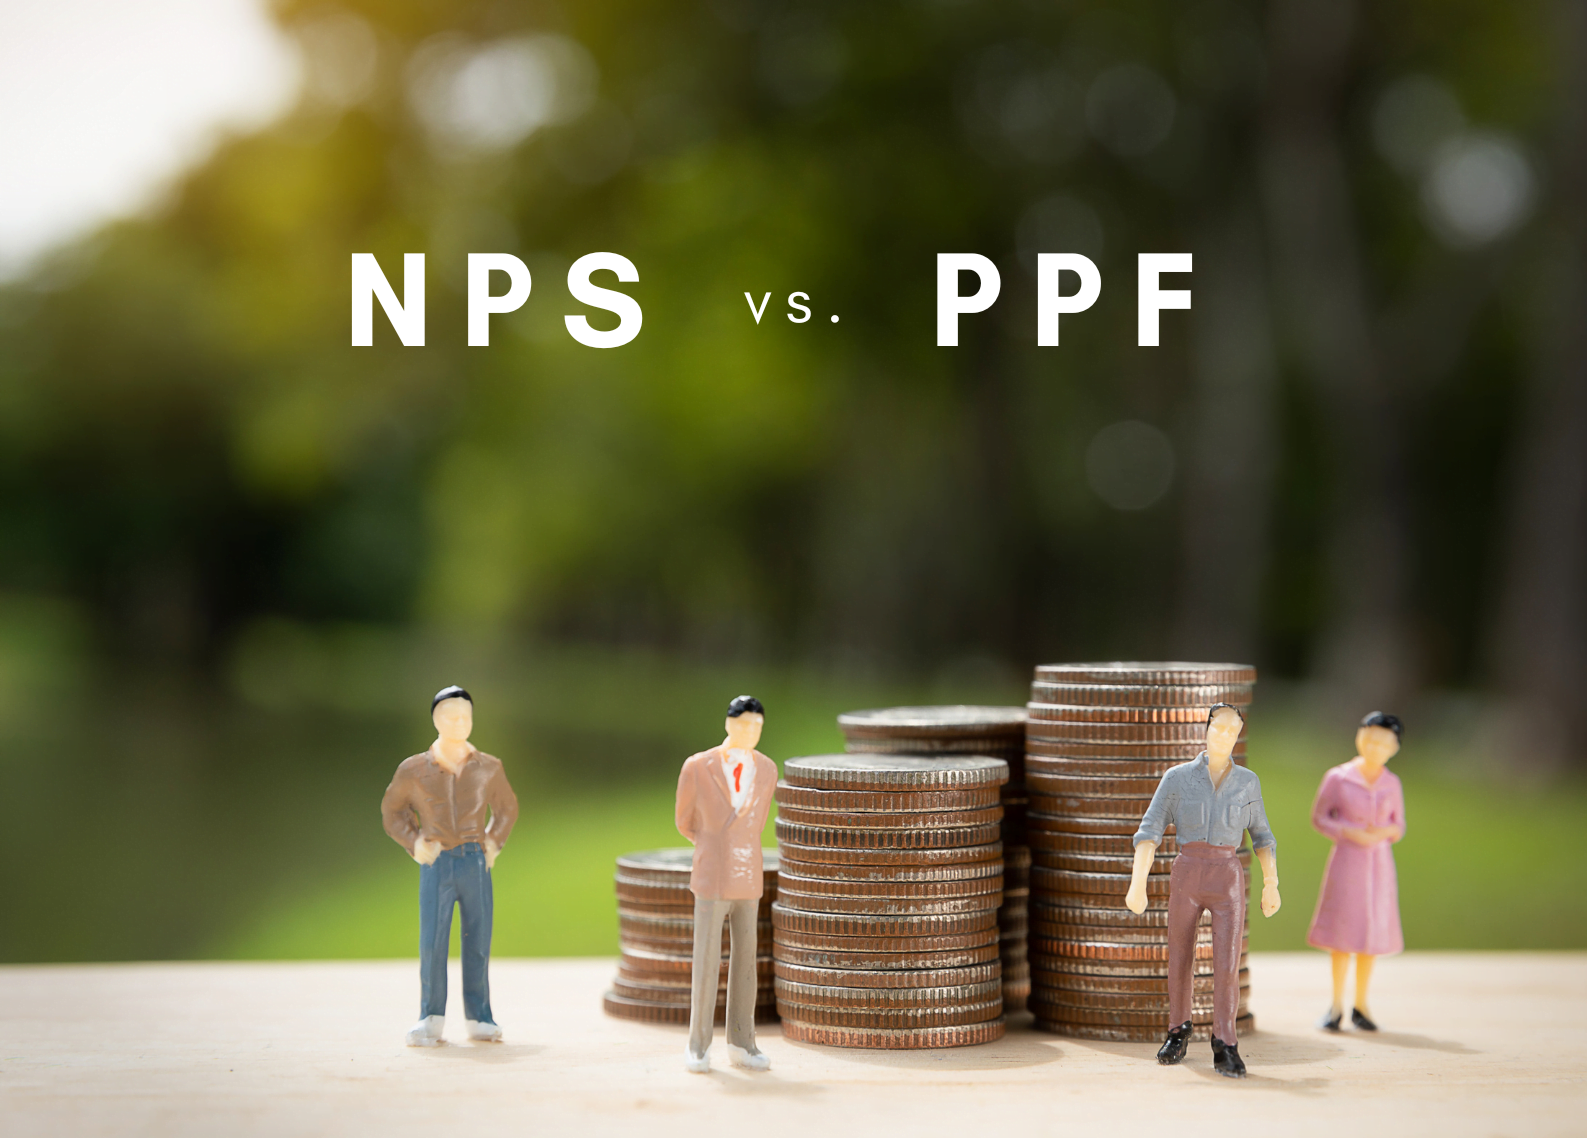 The Battle between NPS and PPF